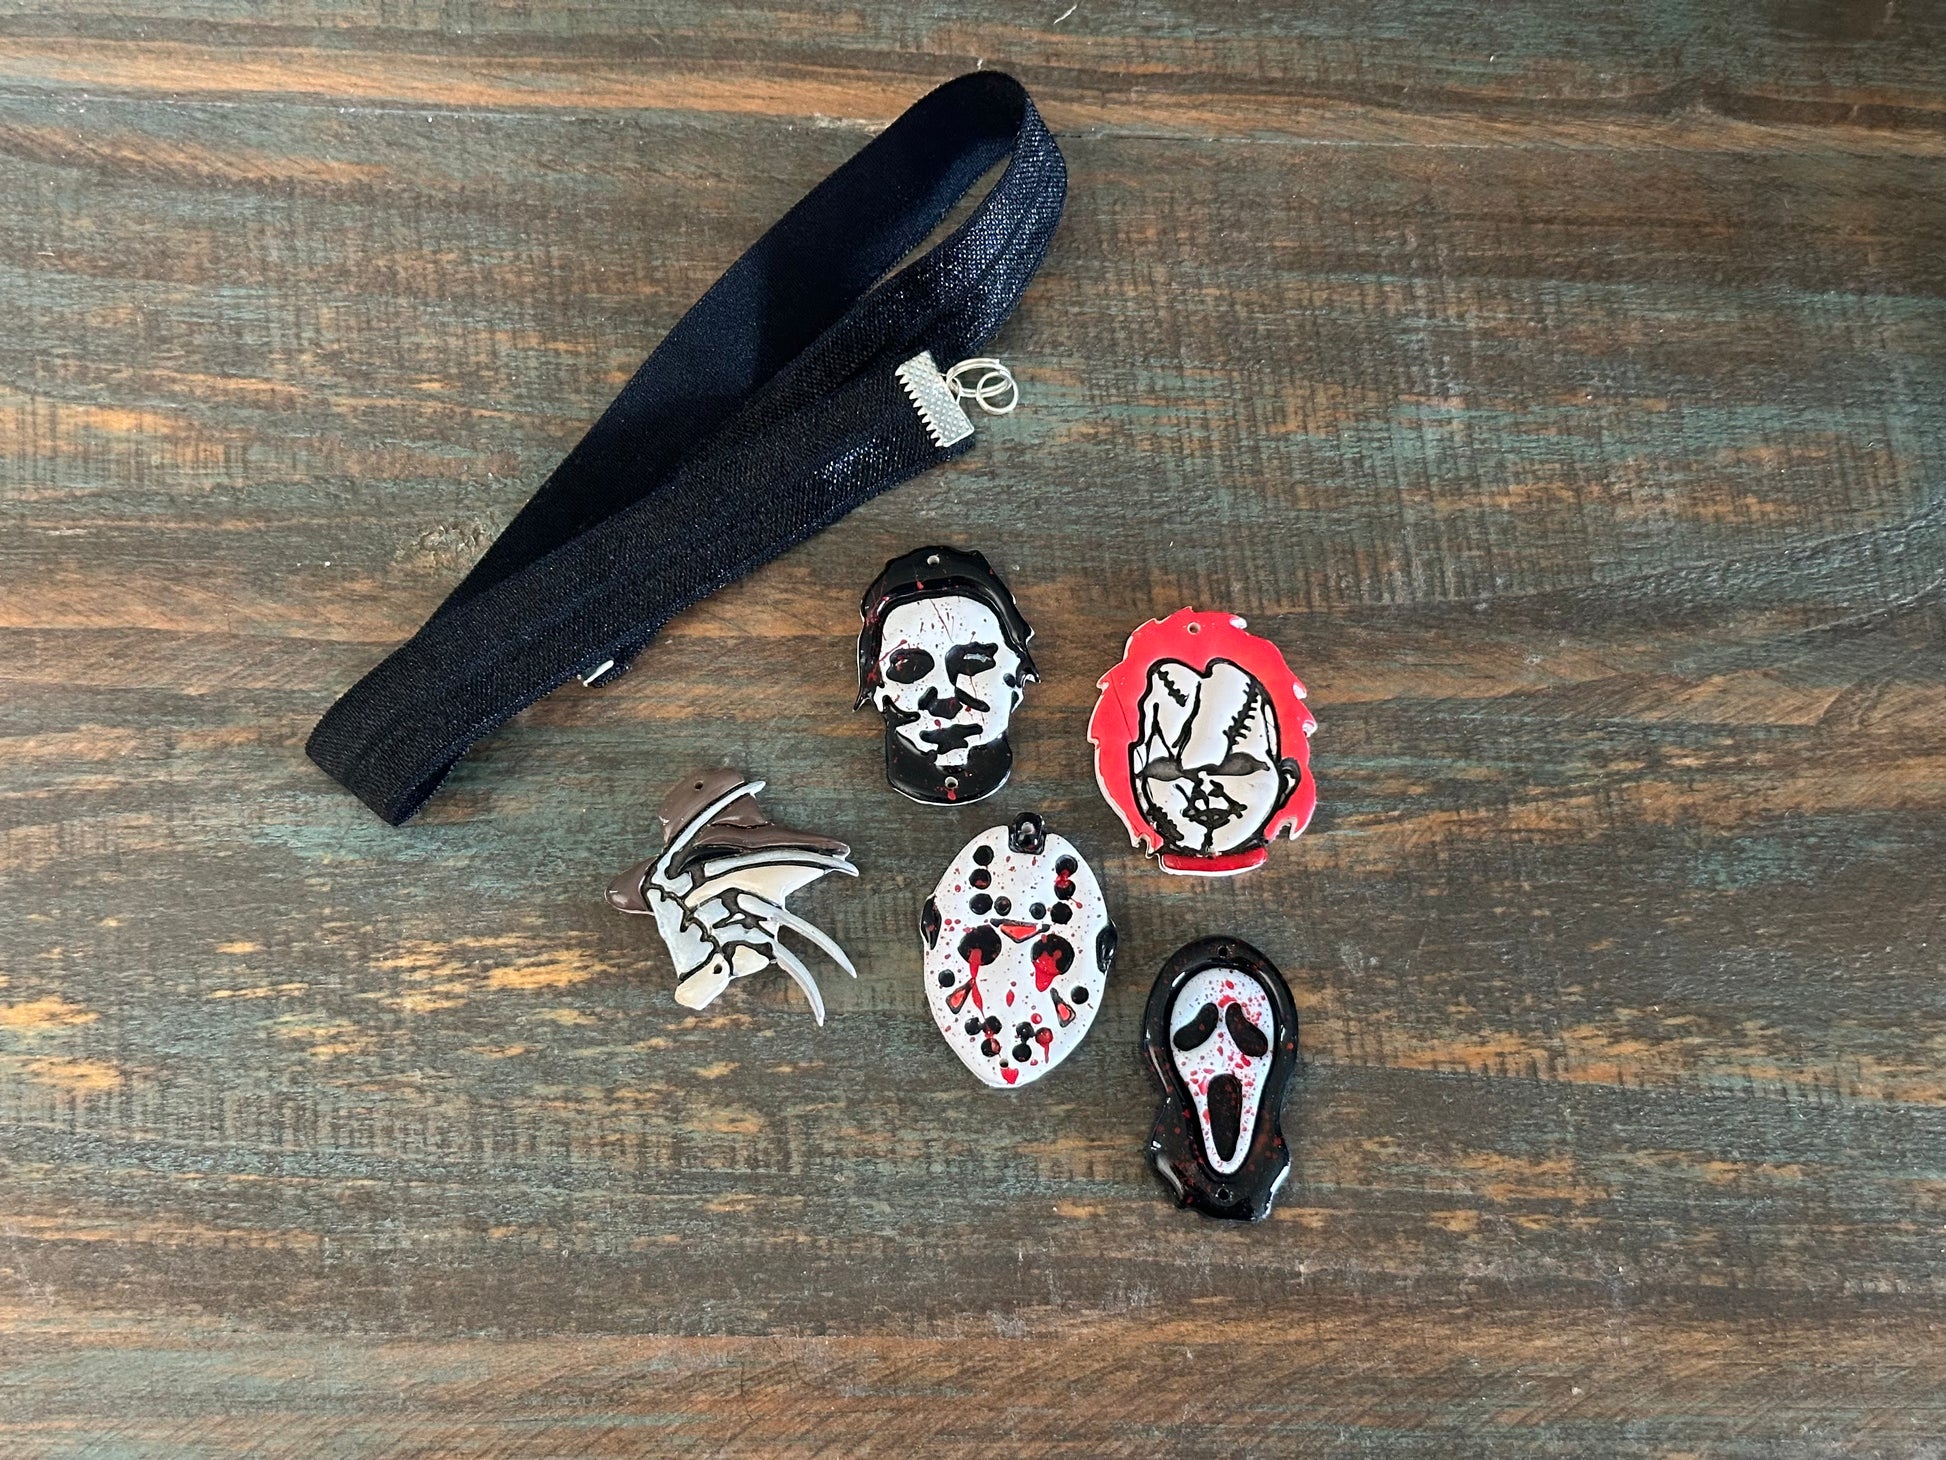 Halloween Bookmarks, Slasher movies, Elastic Bookmarks, Unique Bookmarks, Halloween, Slasher Movies, Horror Movies, Teacher Gifts, Literary Gifts, Book Lovers Gift, Bookworms, Handmade, Hand Painted, Ghost Face, Chucky, Freddy Krueger, Jason, Michael Myers,Fun Gifts, Halloween Lovers